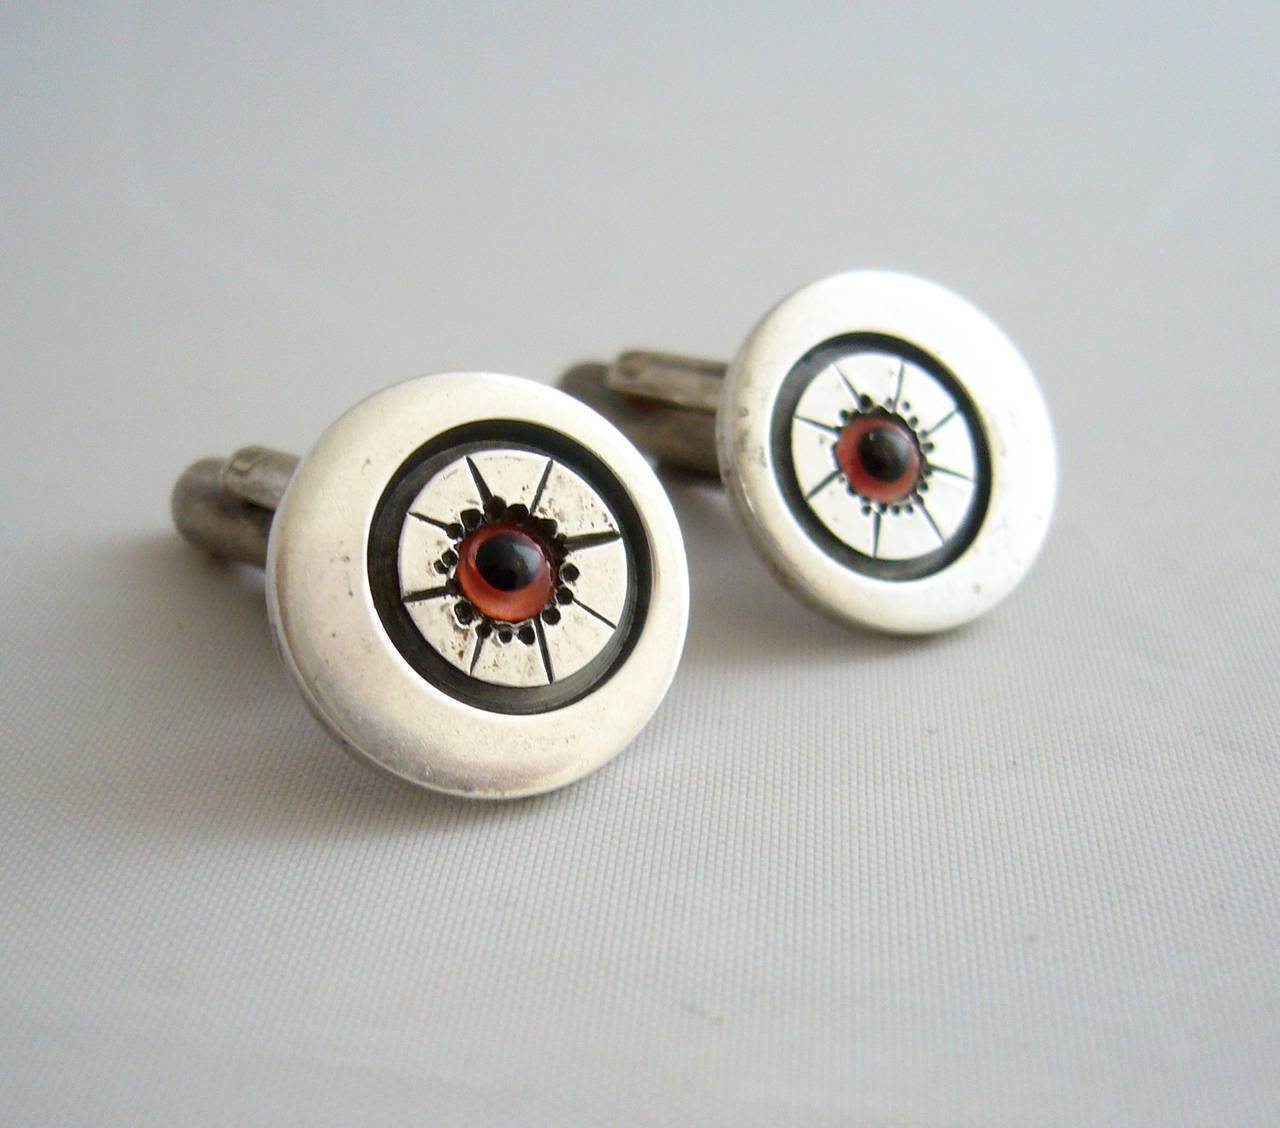 A rare pair of early 1950's  eyeball cufflinks by Ed Levin of Bennington, Vermont.  Measuring 5.8